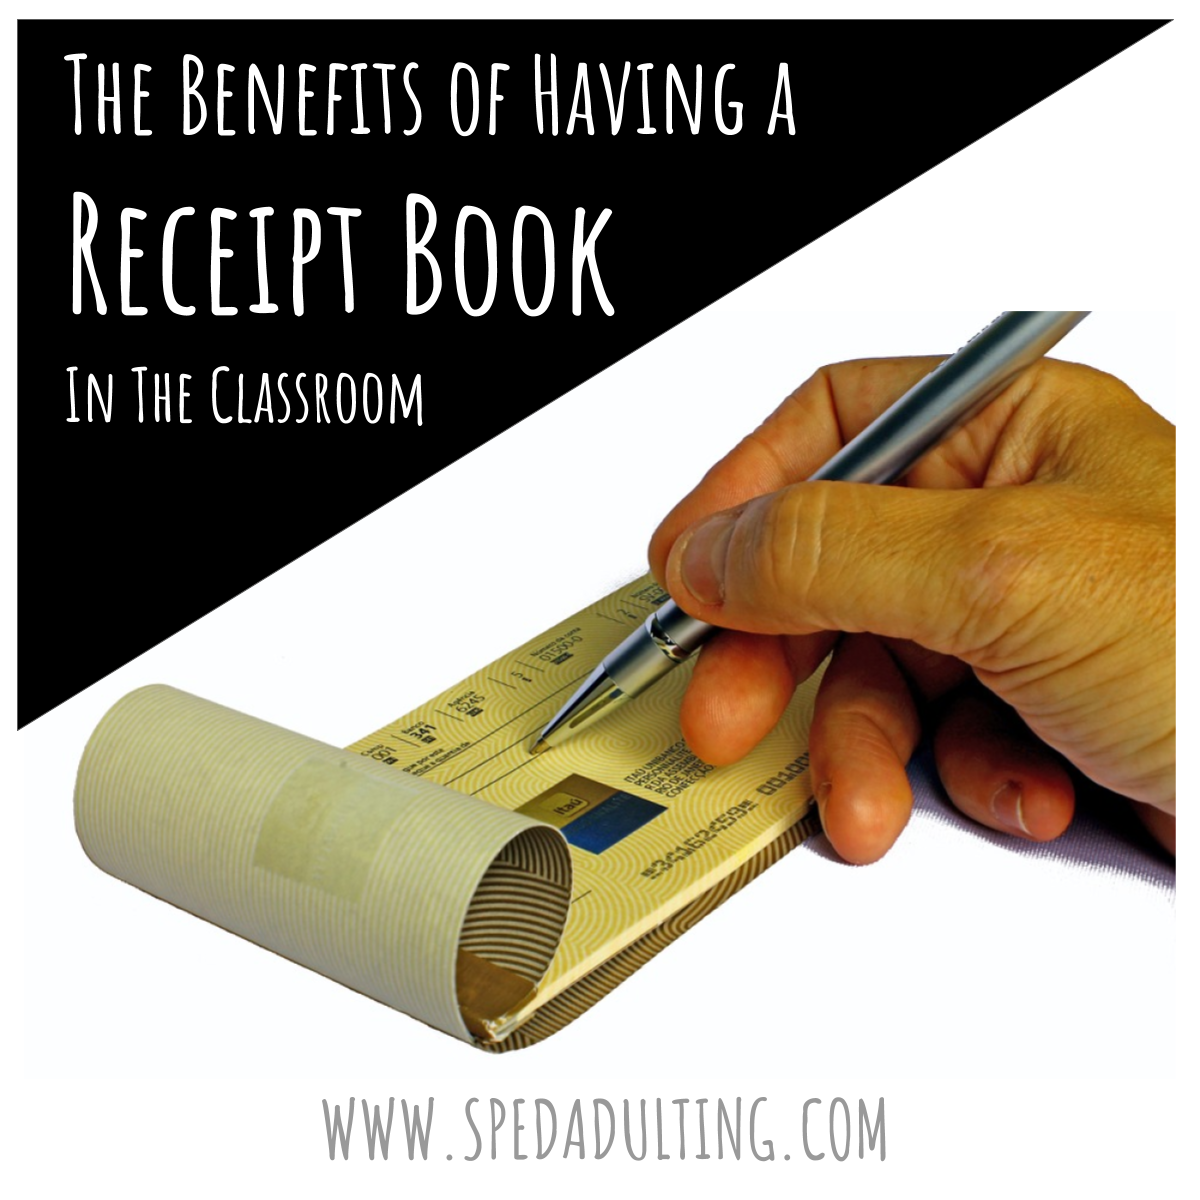 BLOG: The benefits of having a receipt book in the classroom.